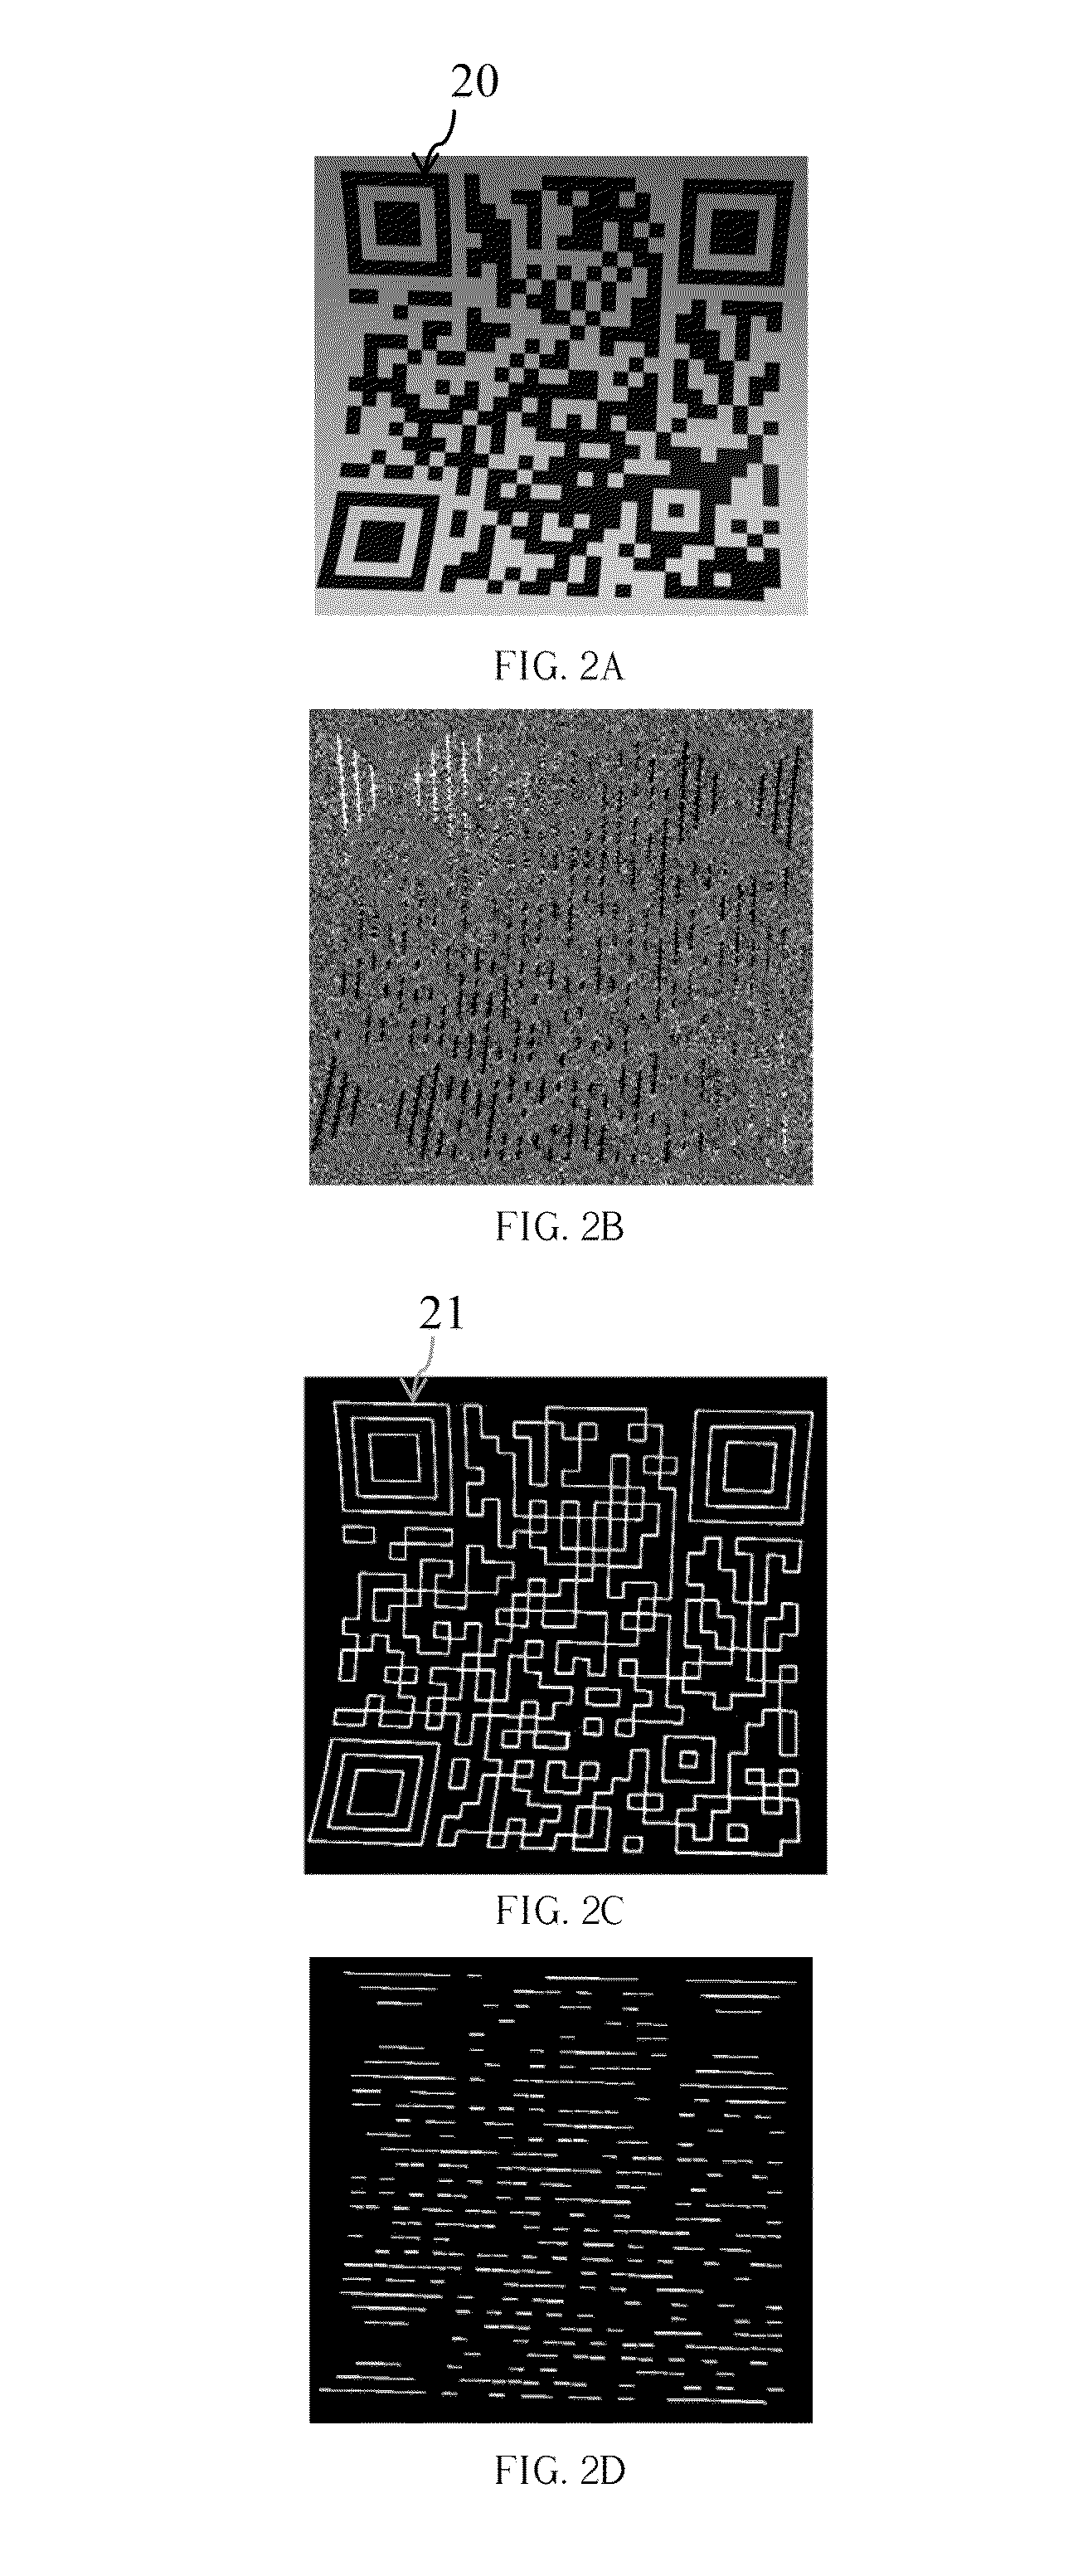 Method for auto-depicting trends in object contours